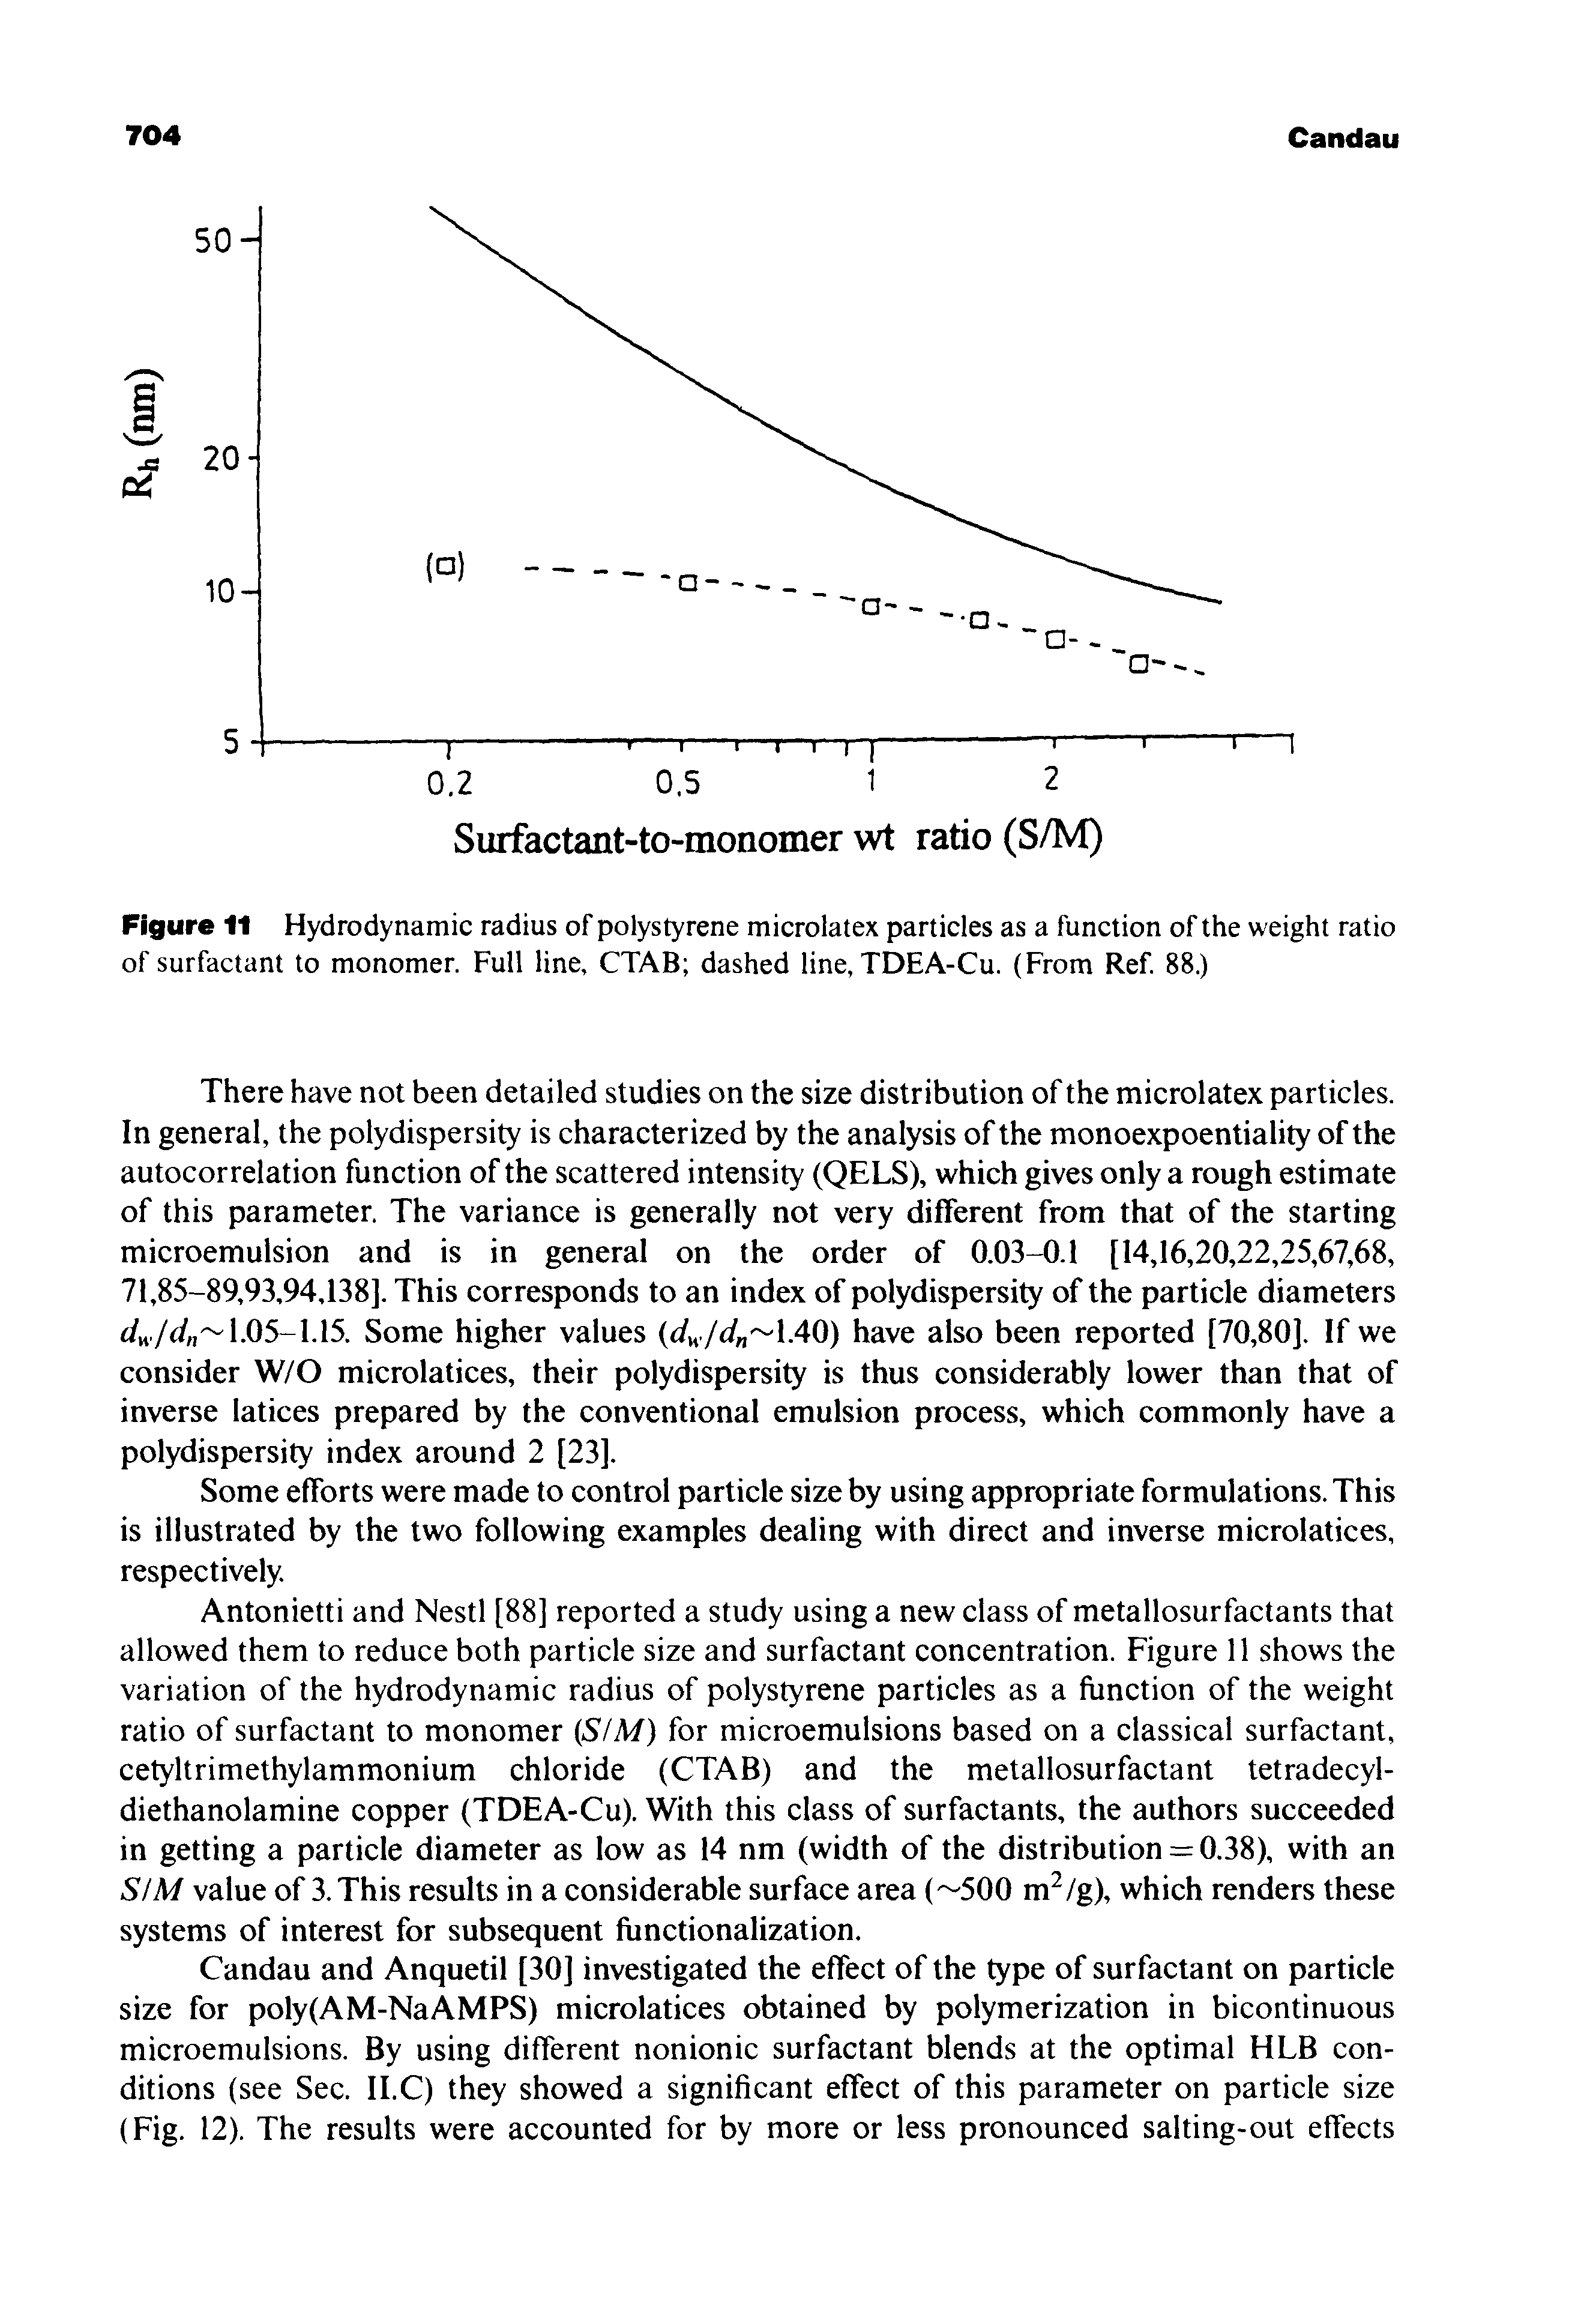 Figure 11 Hydrodynamic radius of polystyrene microlatex particles as a function of the weight ratio of surfactant to monomer. Full line, CTAB dashed line, TDEA-Cu. (From Ref. 88.)...